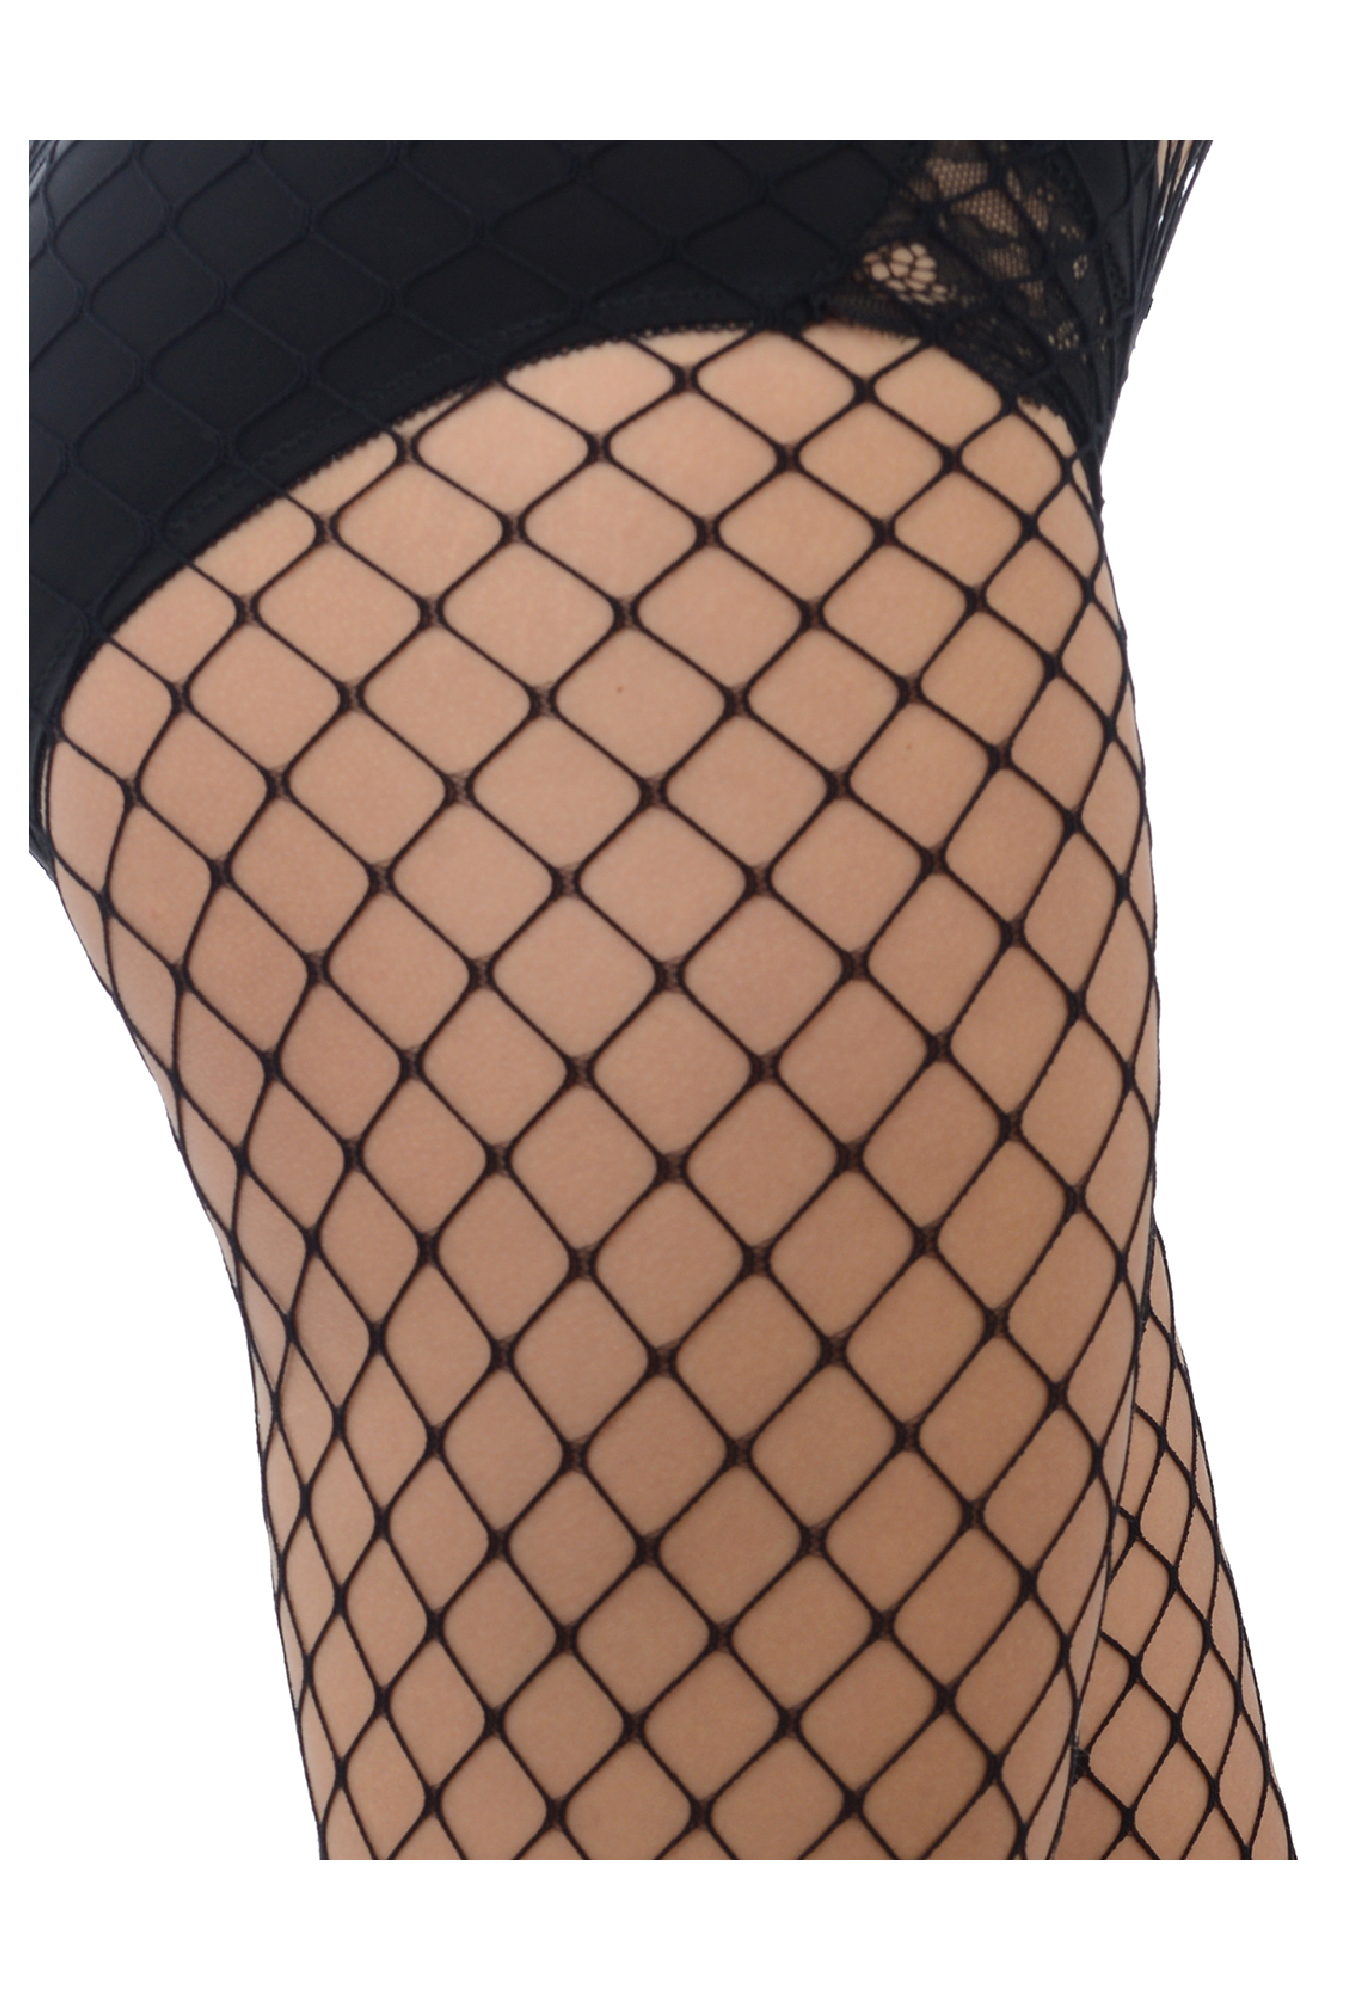 Buy online Black Net Stockings from bottom wear for Women by Da Intimo for  ₹540 at 40% off